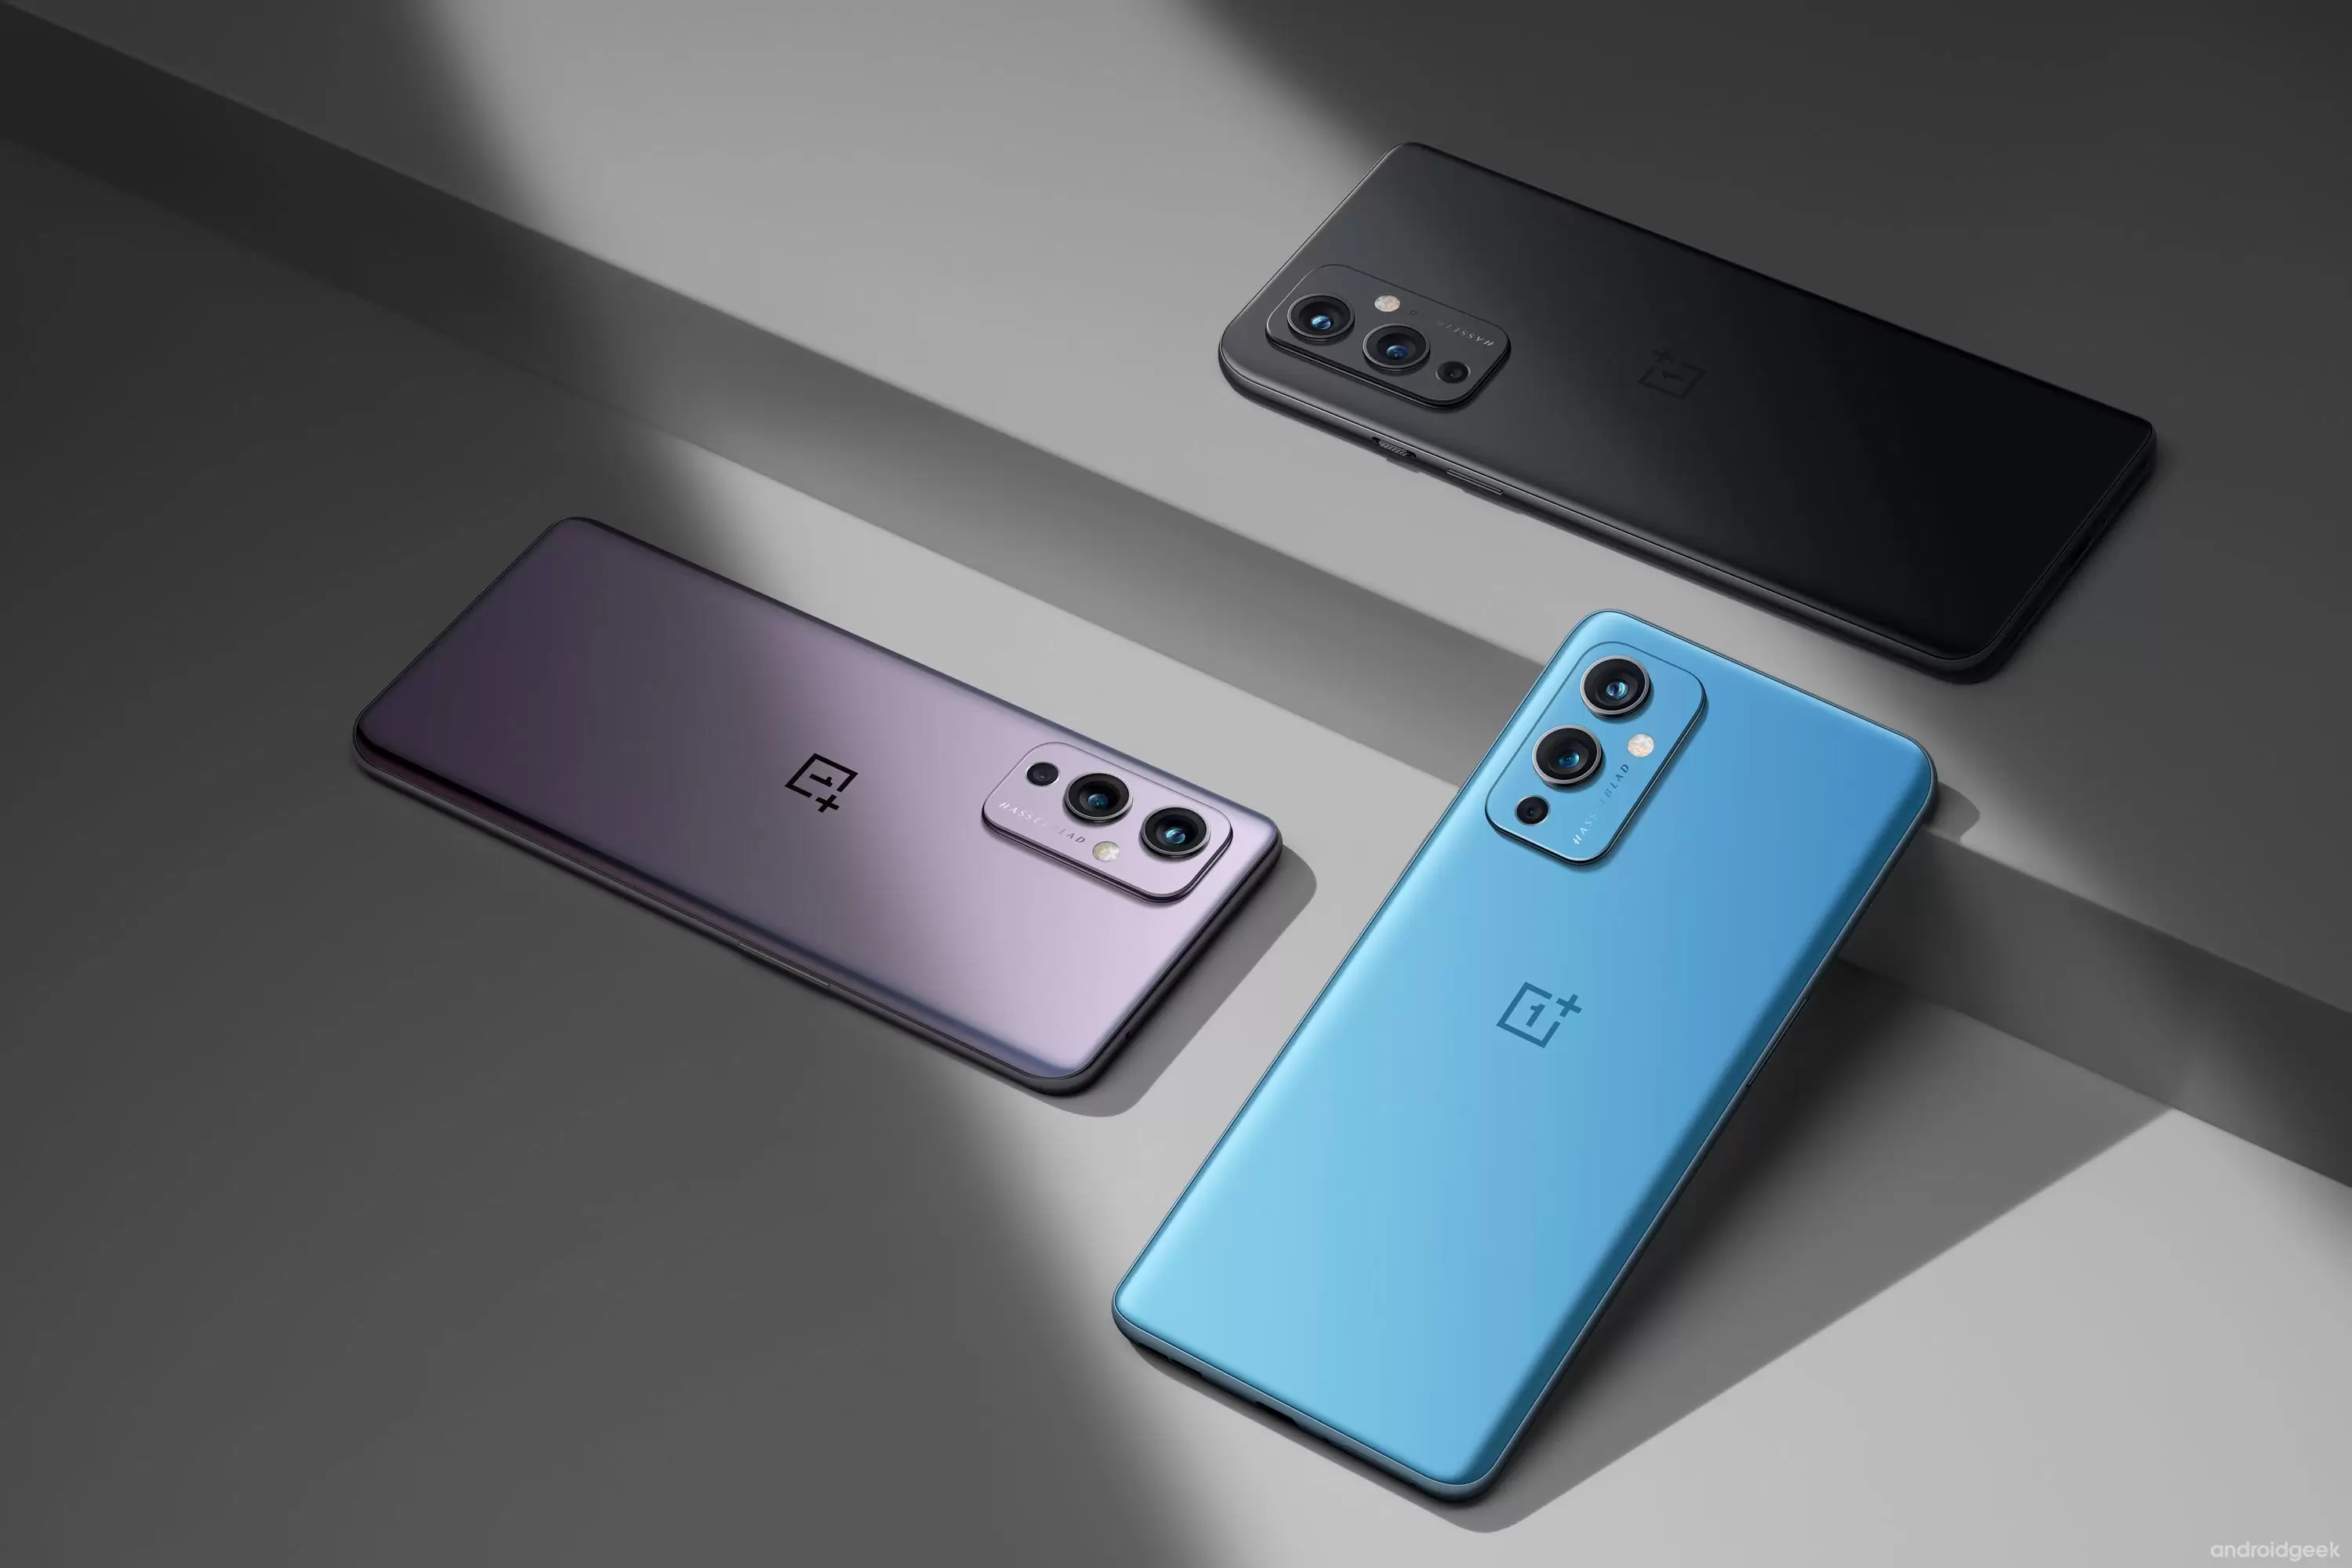 OnePlus 9 and 9 Pro are now receiving the new OxygenOS 11.2.5.5 2 update